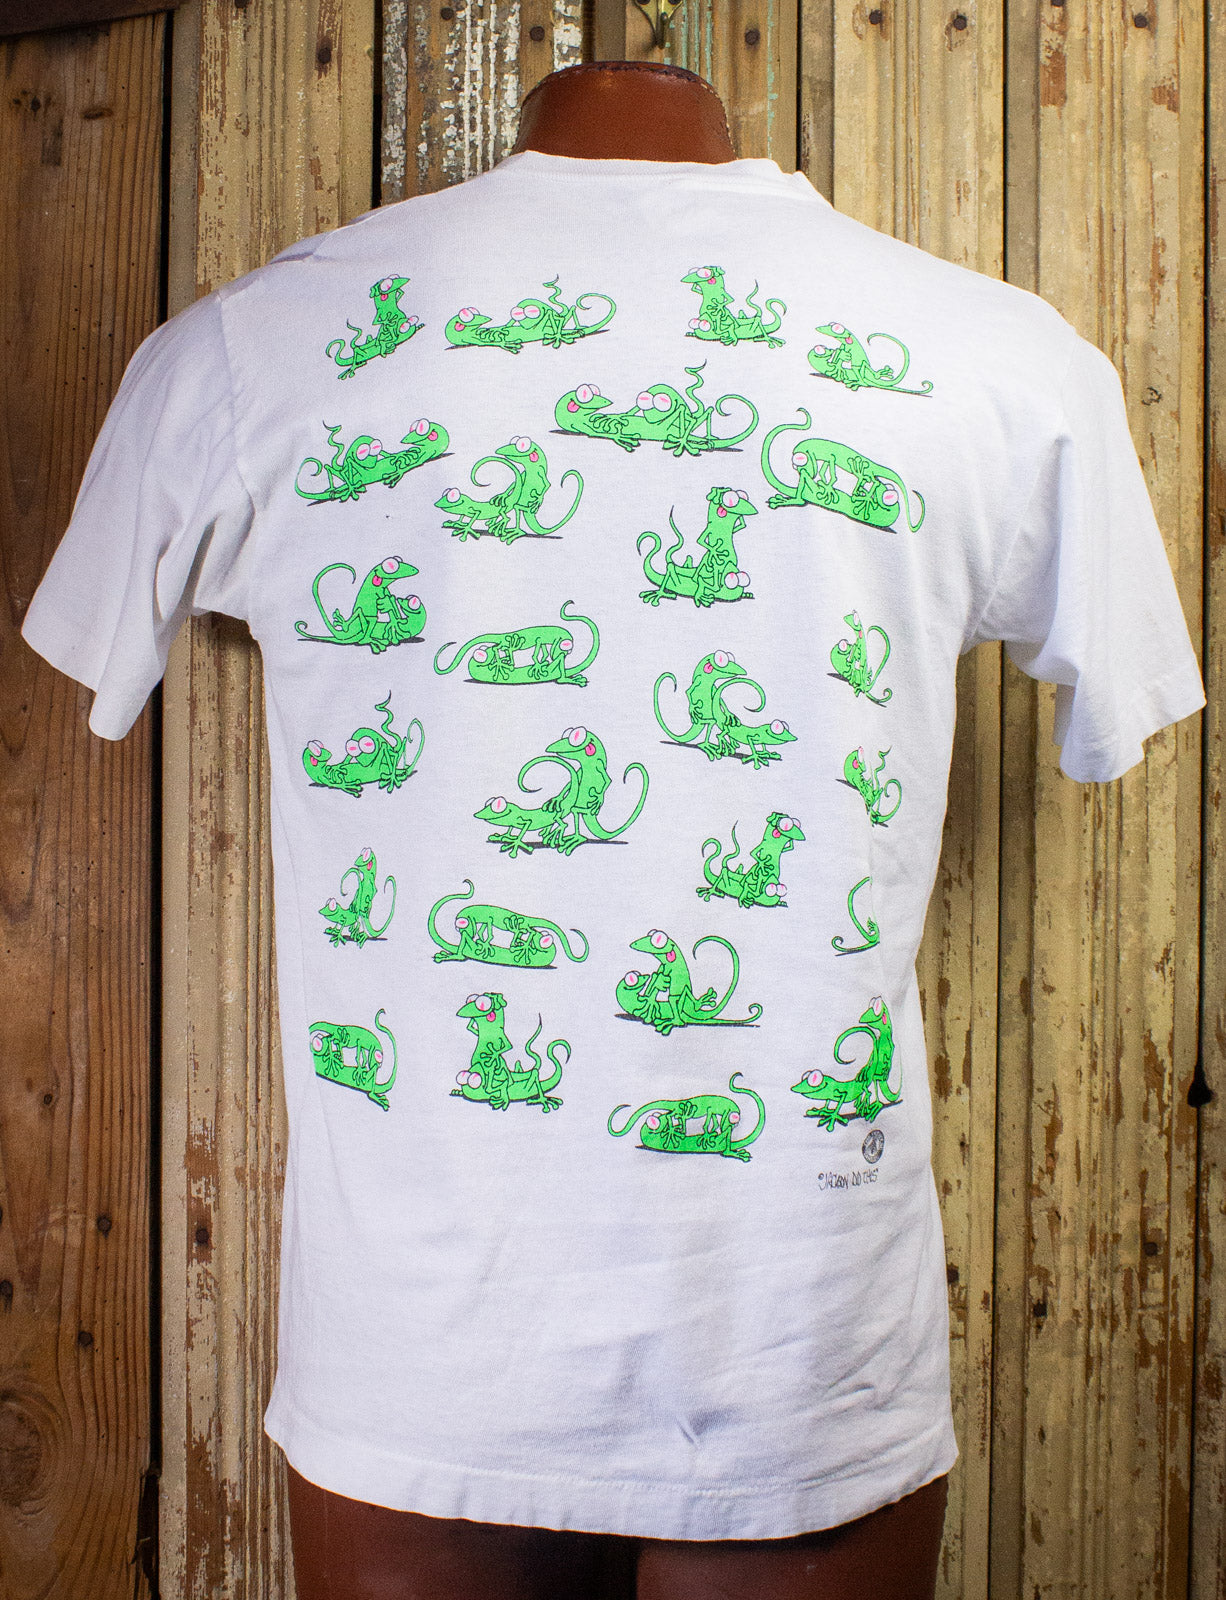 Vintage New Orleans Lizard Sex Graphic T Shirt 90s White Large